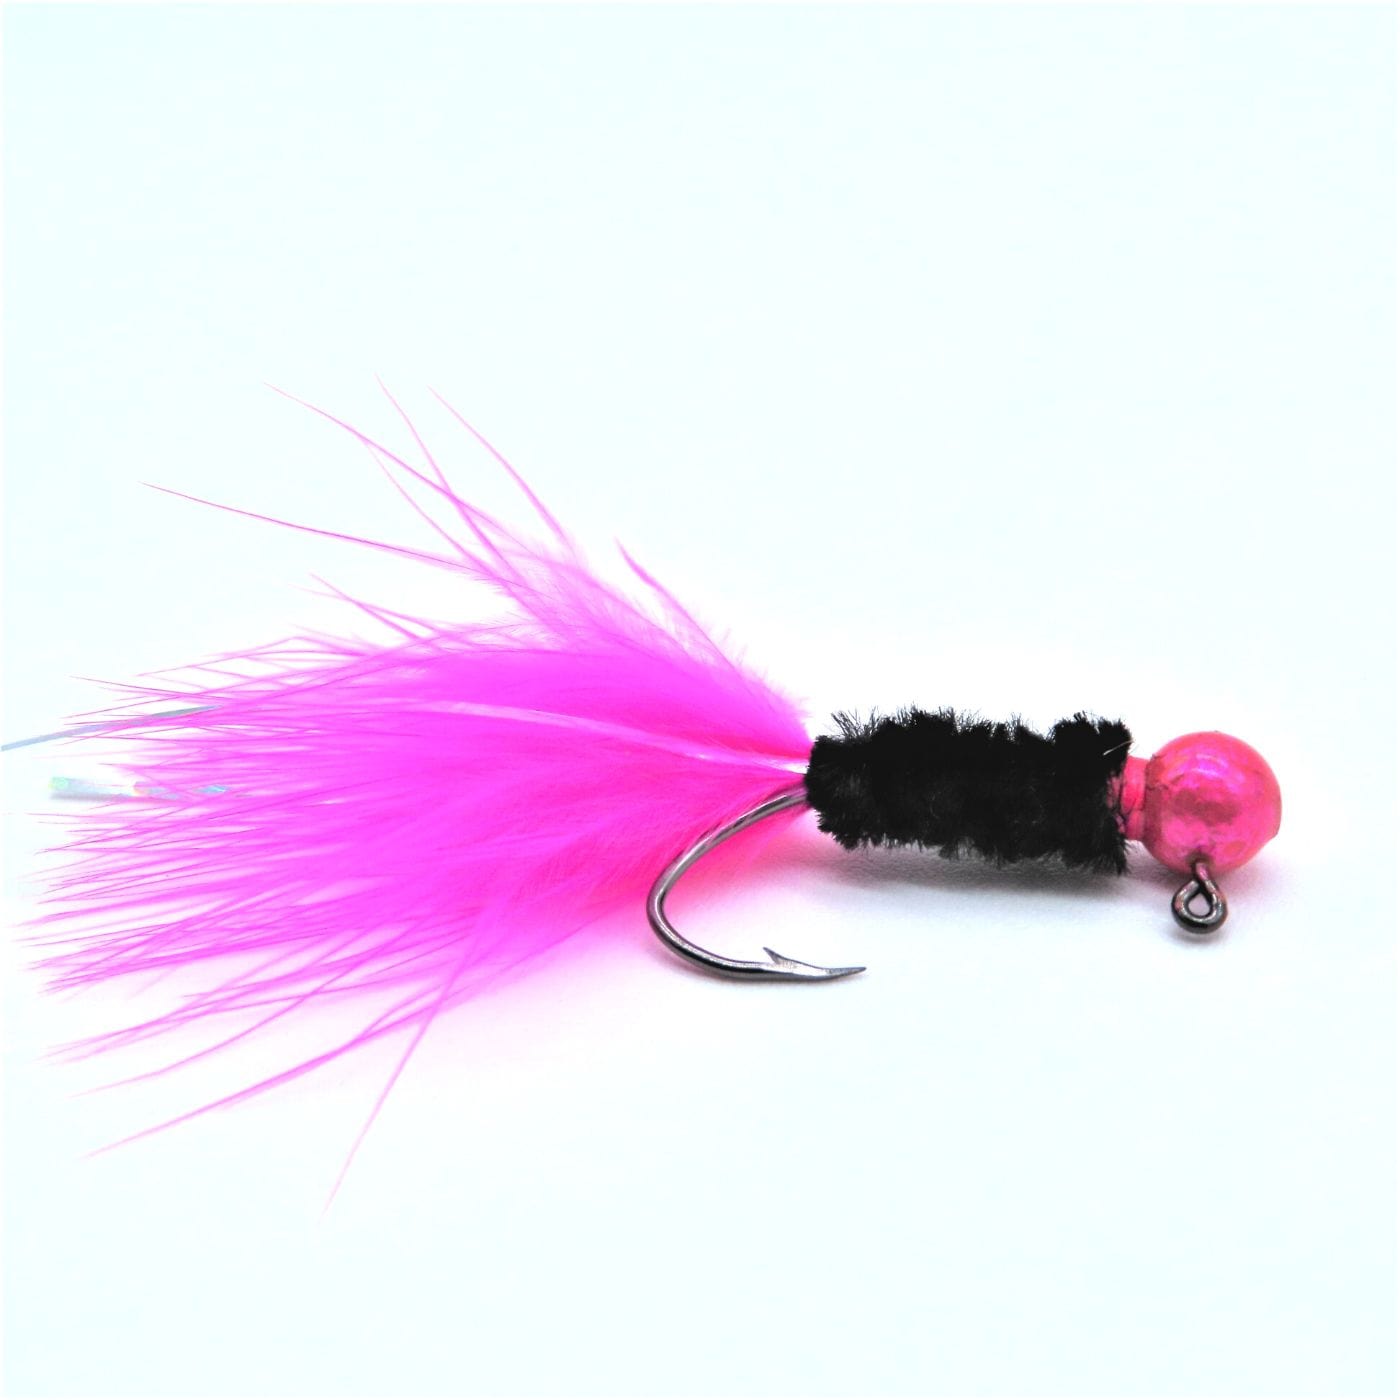 Hand tied Crappie jig featuring a Round candy pink jig head,black rayon chenille body, hot pink marabou tail and silver flash. Hand tied onto a #4 Mustad sickle hook by Ramble Tamble Tackle.